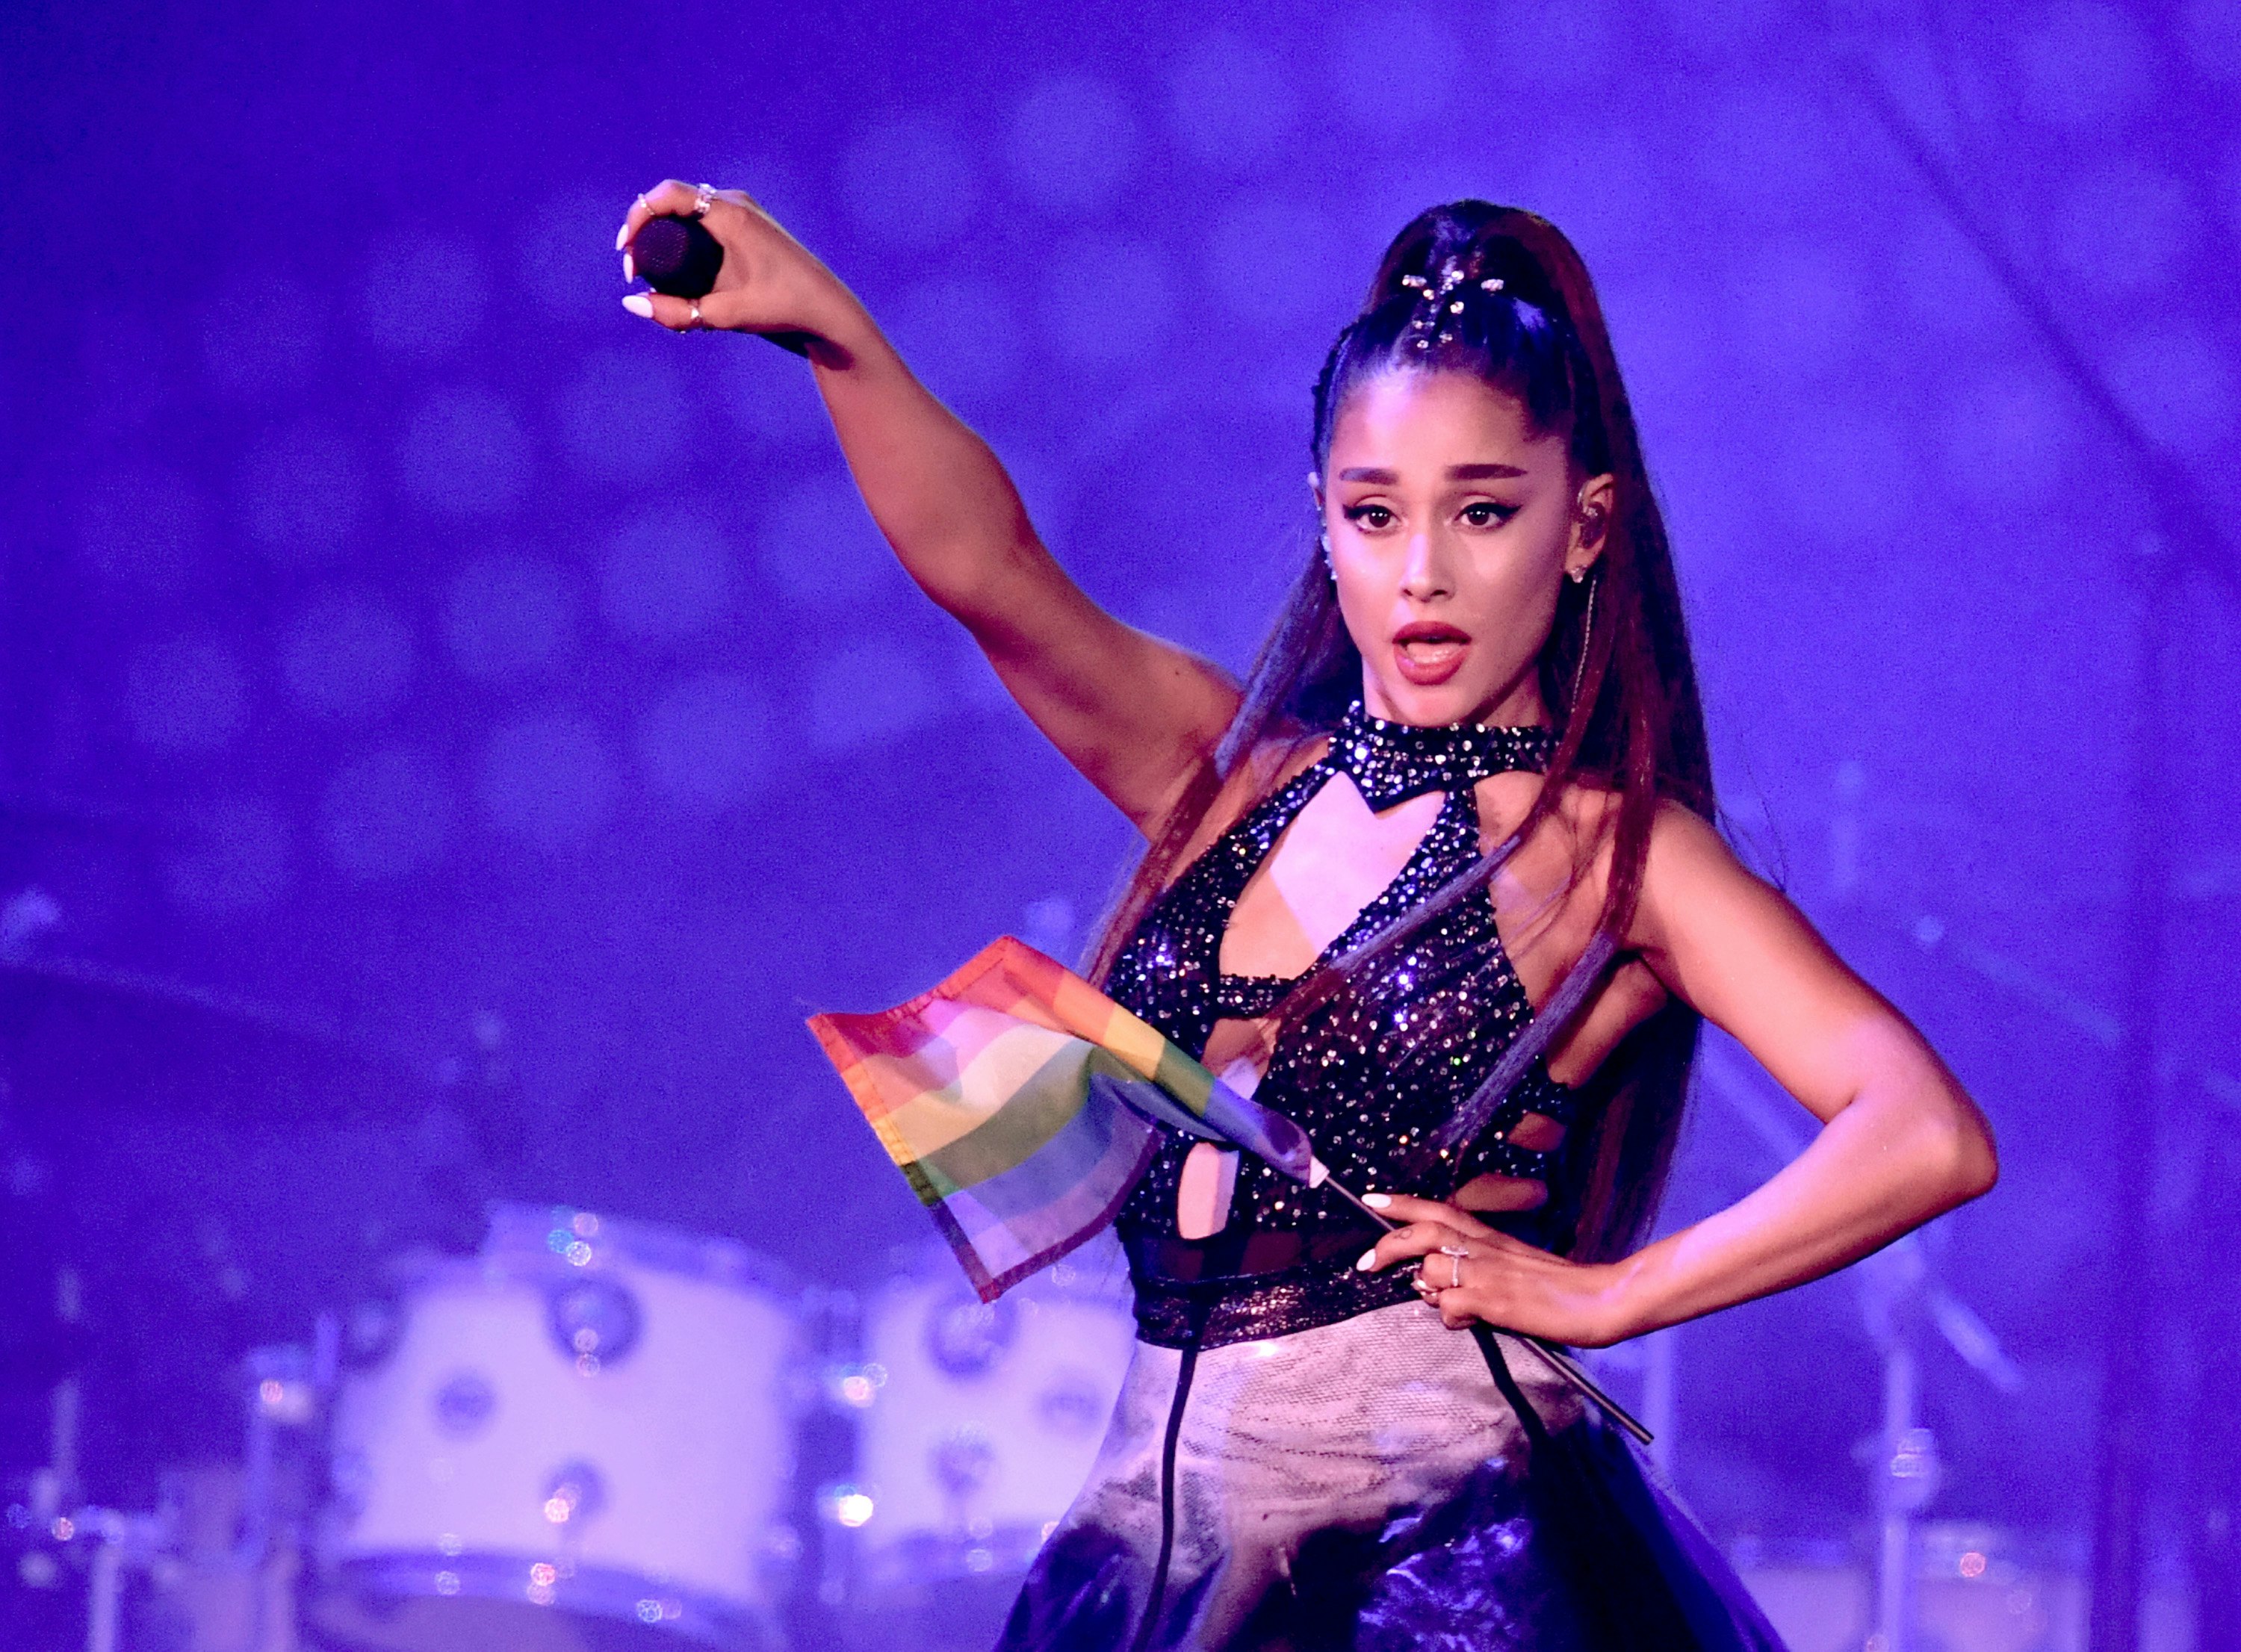 This Ariana Grande Sweetener Lyric Is Turning Into A Major